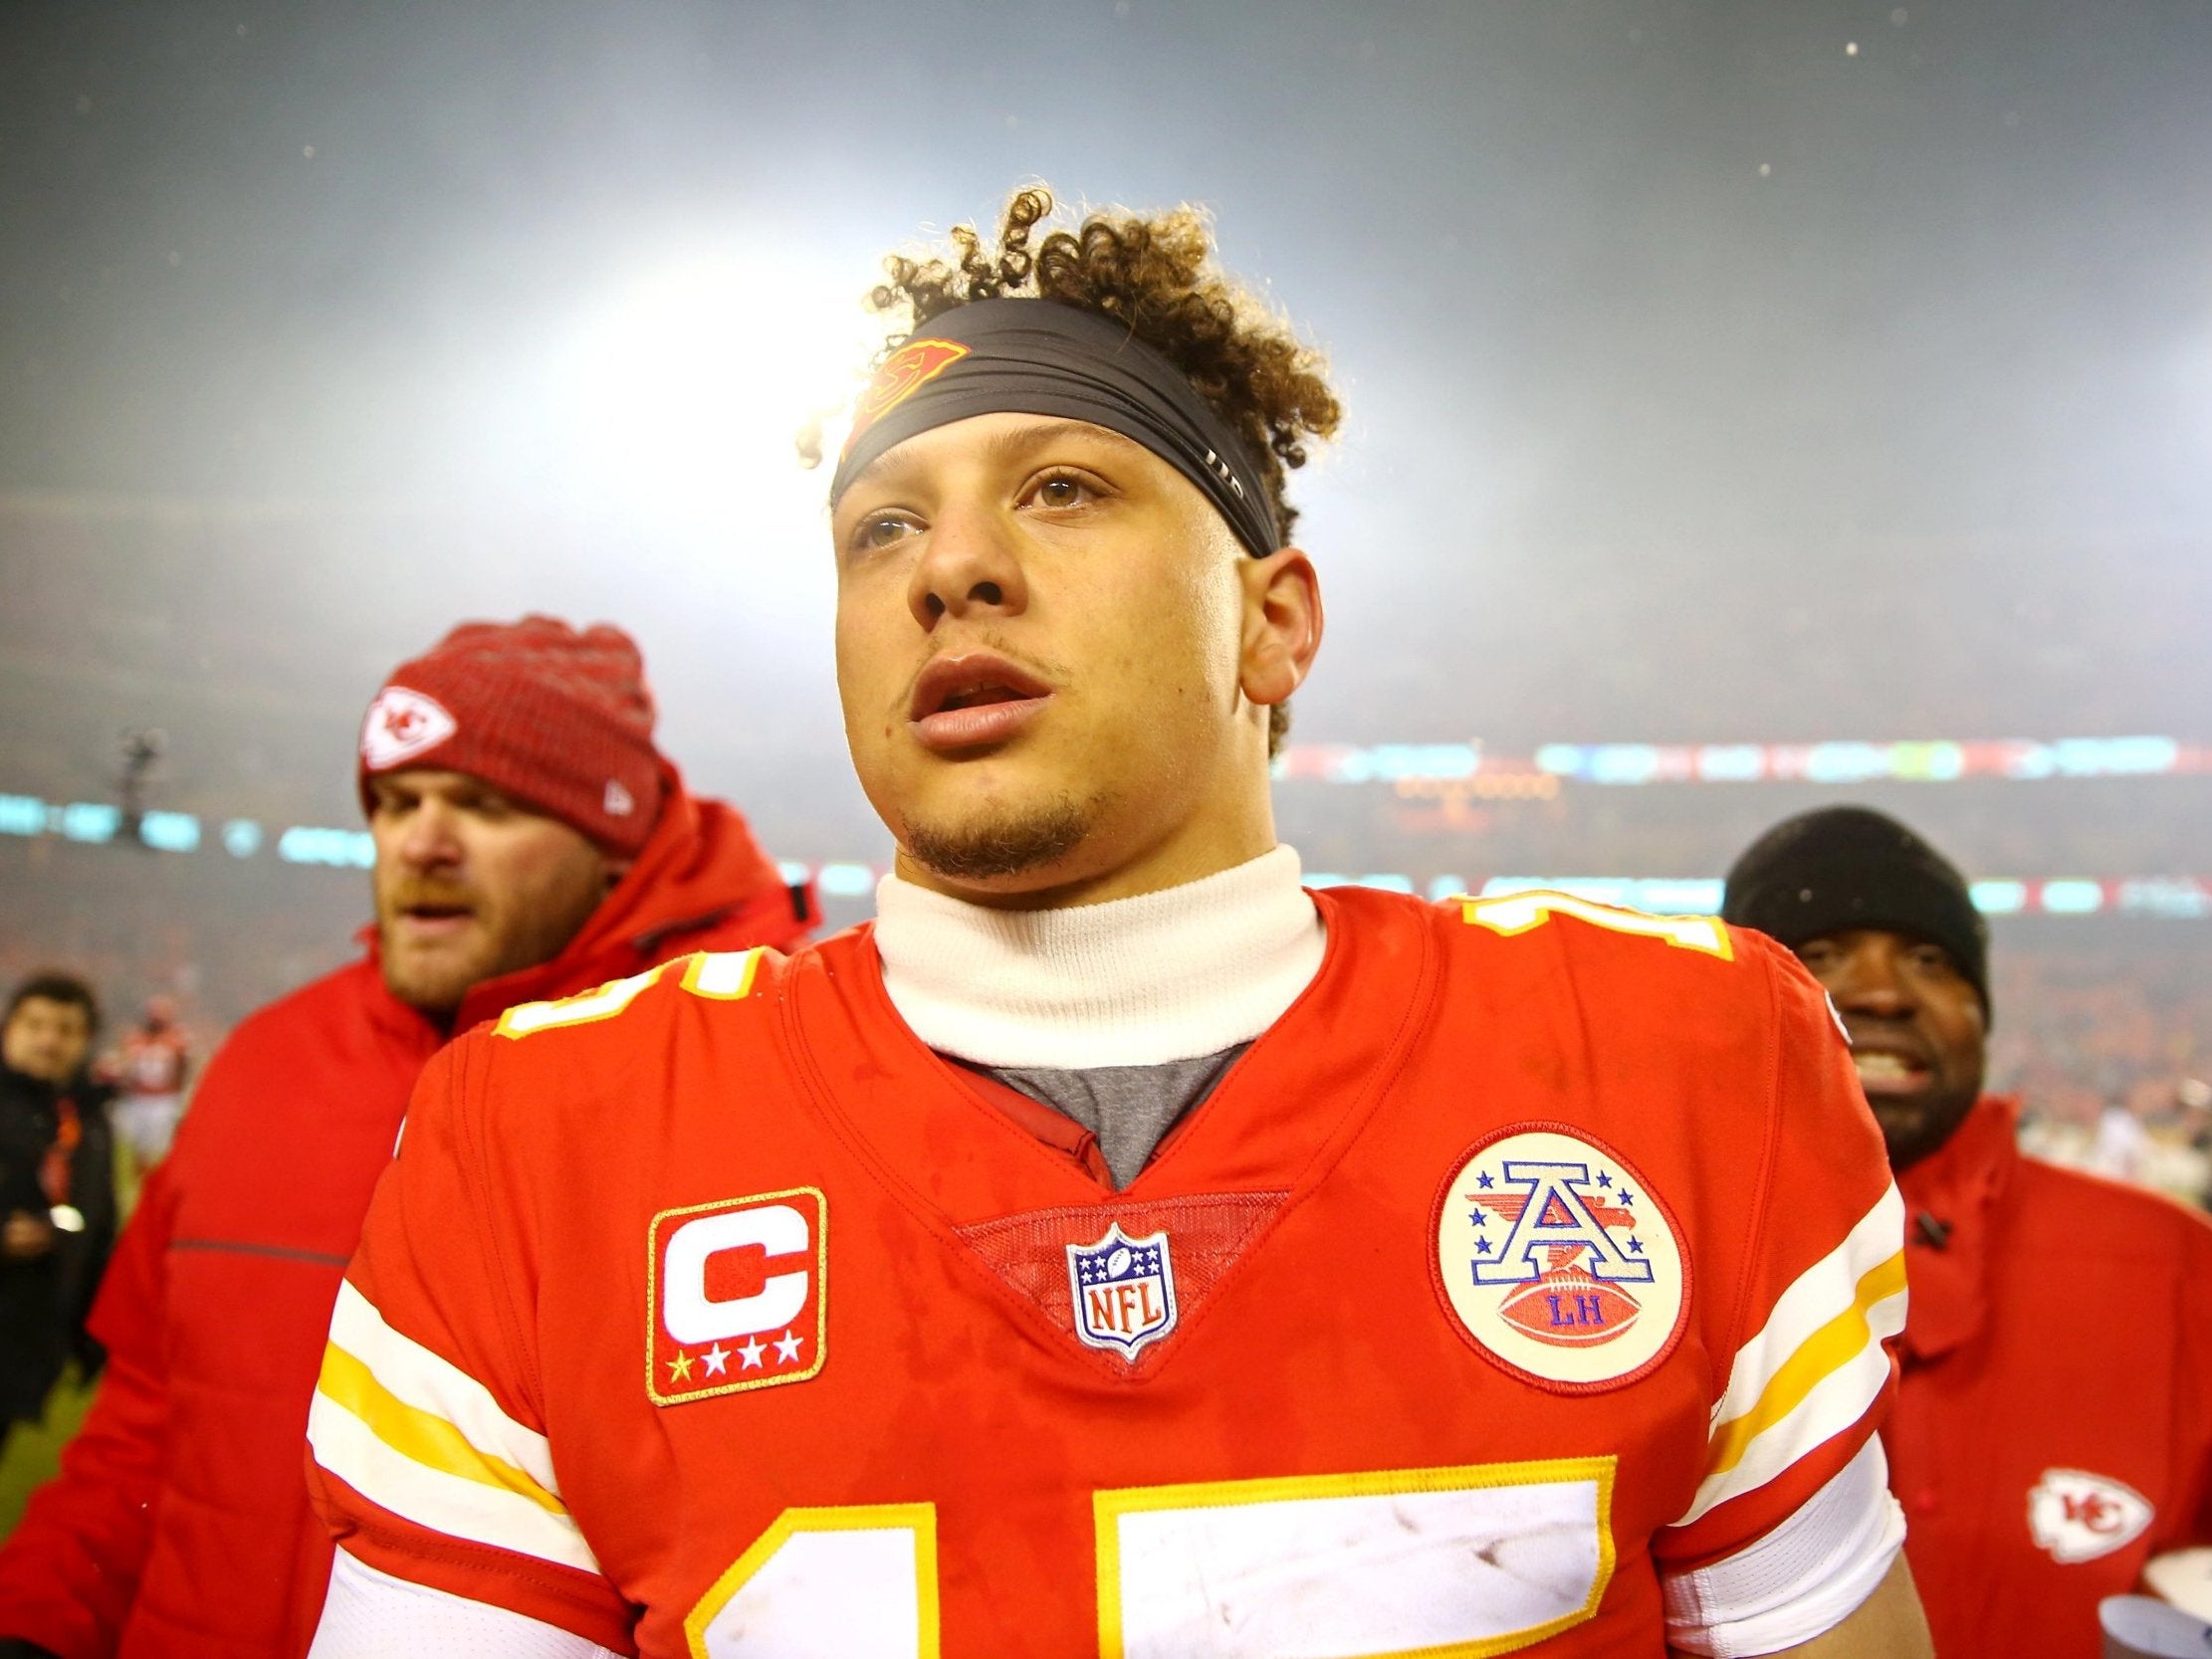 The Chiefs are into the AFC title game